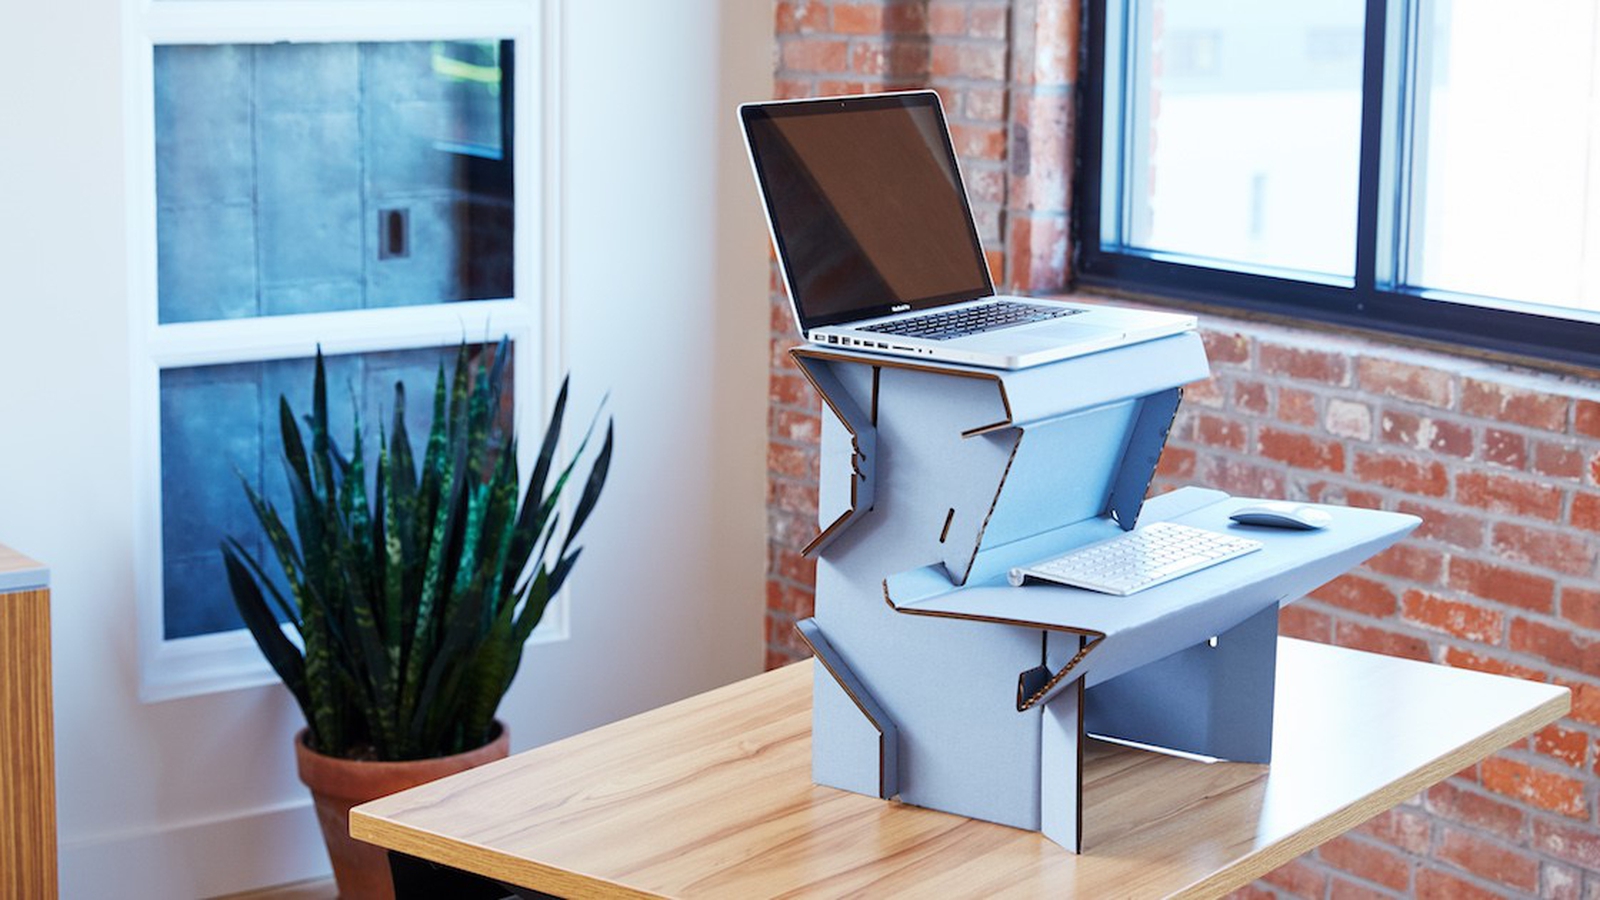 Refresh your Workspace with a Budget-friendly DIY Smart Desk